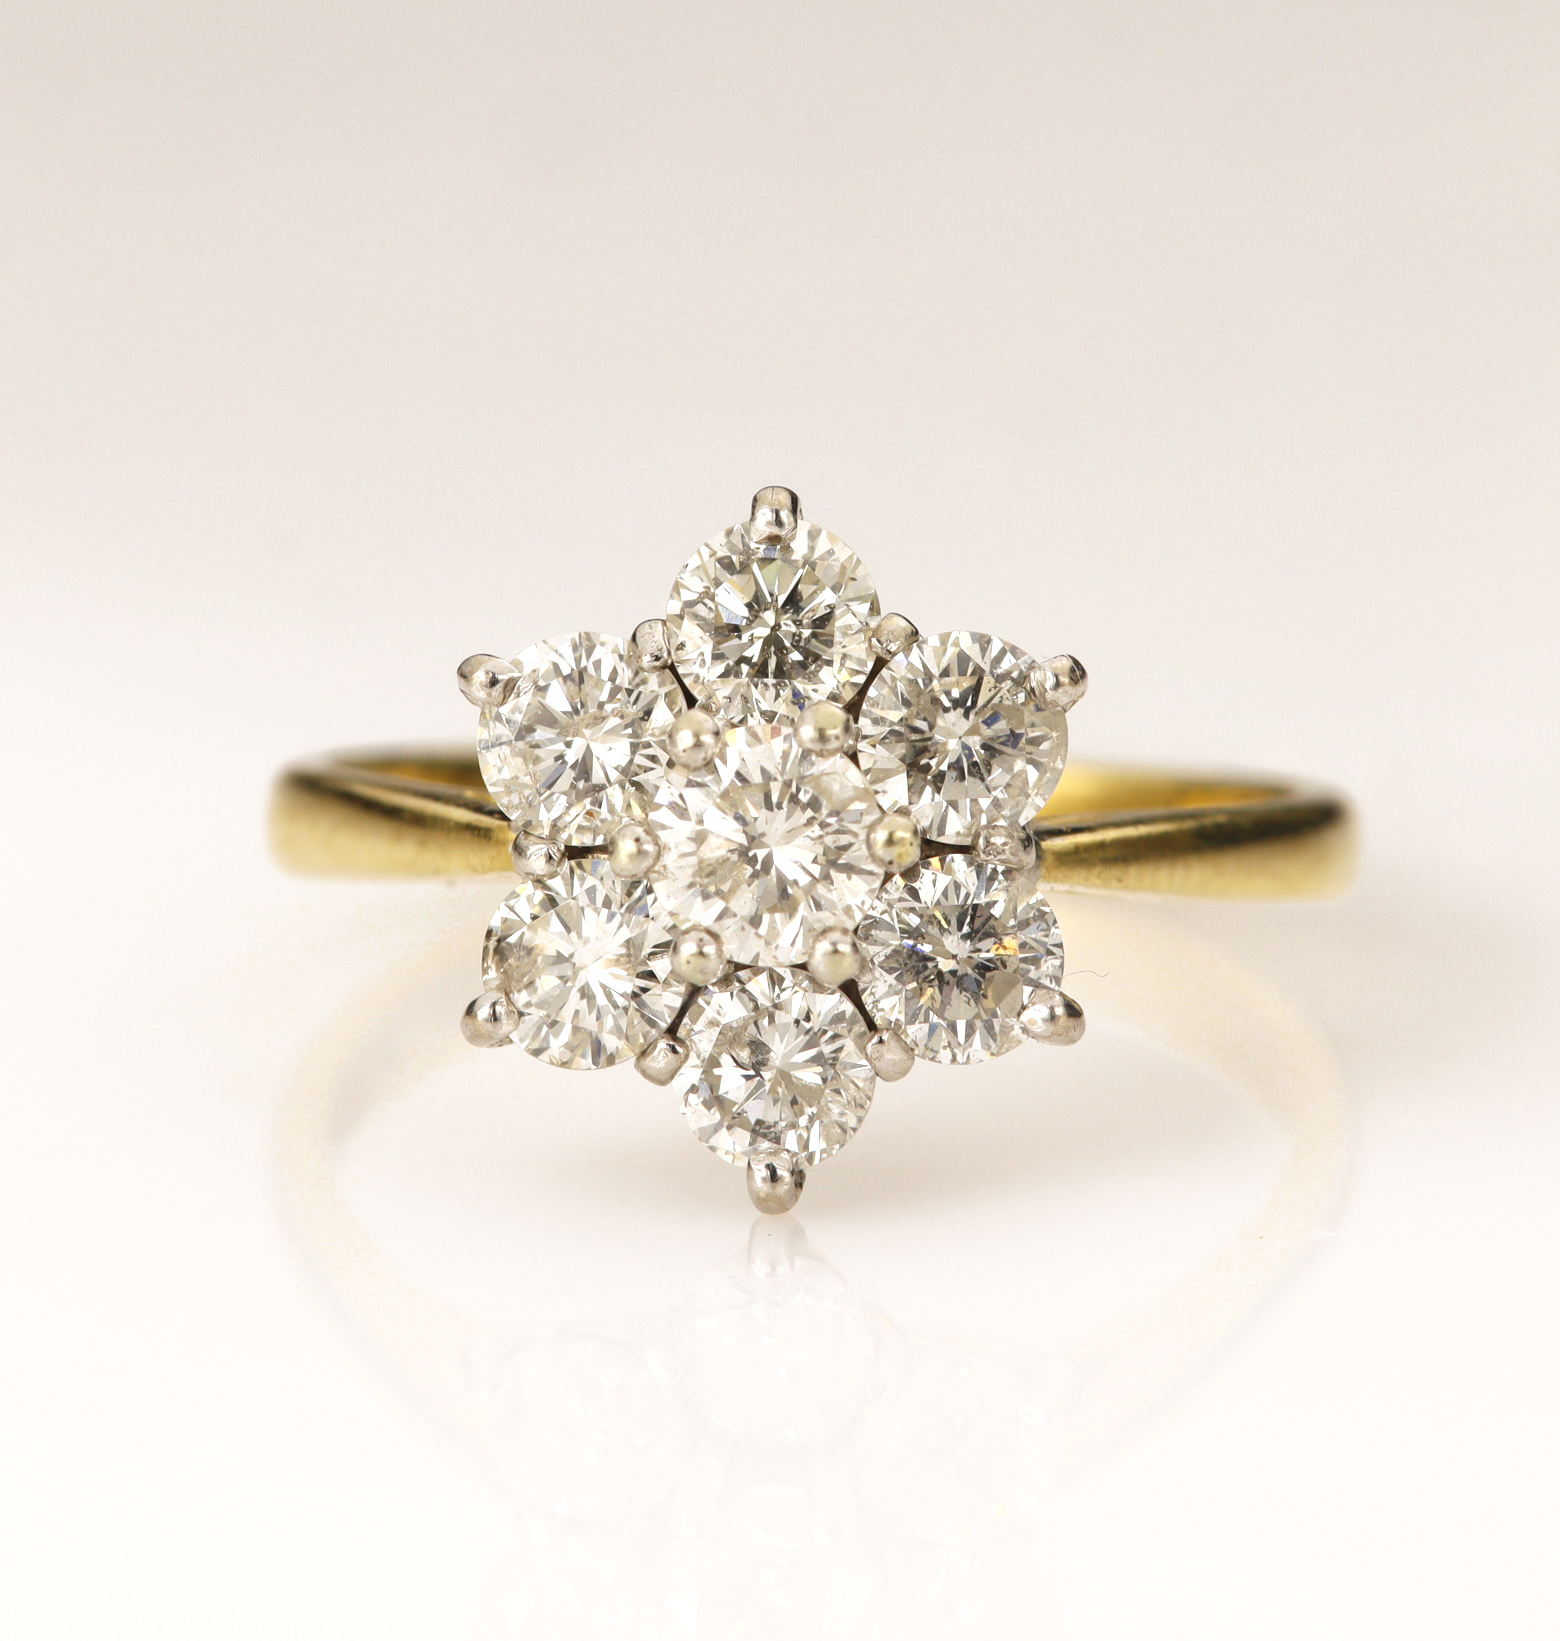 18ct yellow gold diamond daisy cluster ring estimated total weight approx 1.47ct, seven round